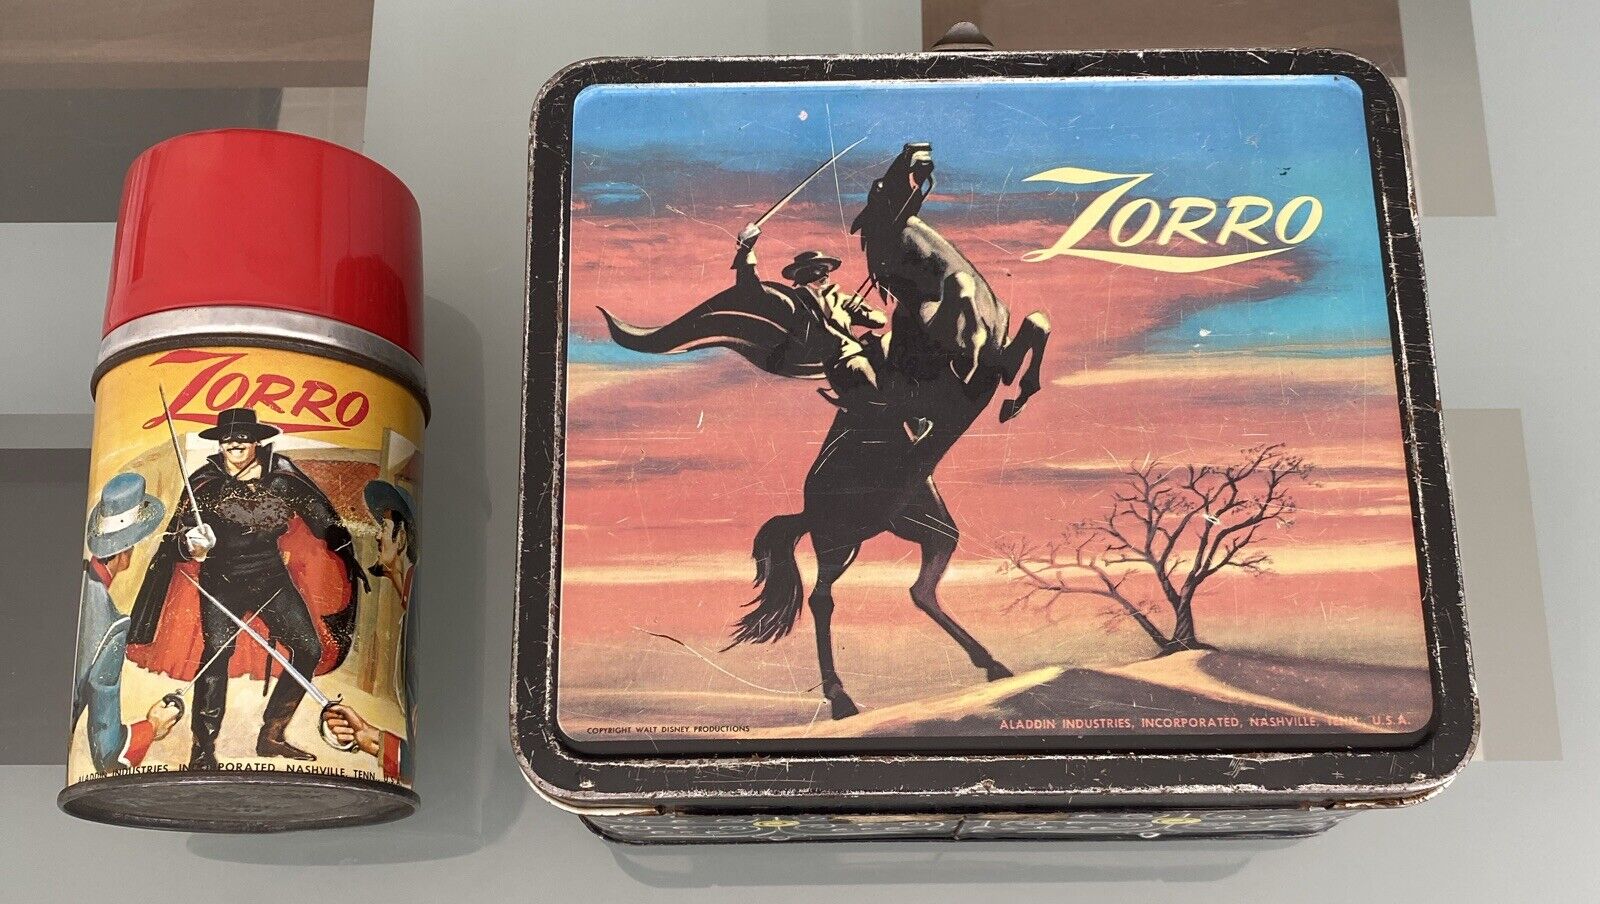 RARE VINTAGE ZORRO LUNCHBOX w/ MATCHING THERMOS Collectibles Antique. 